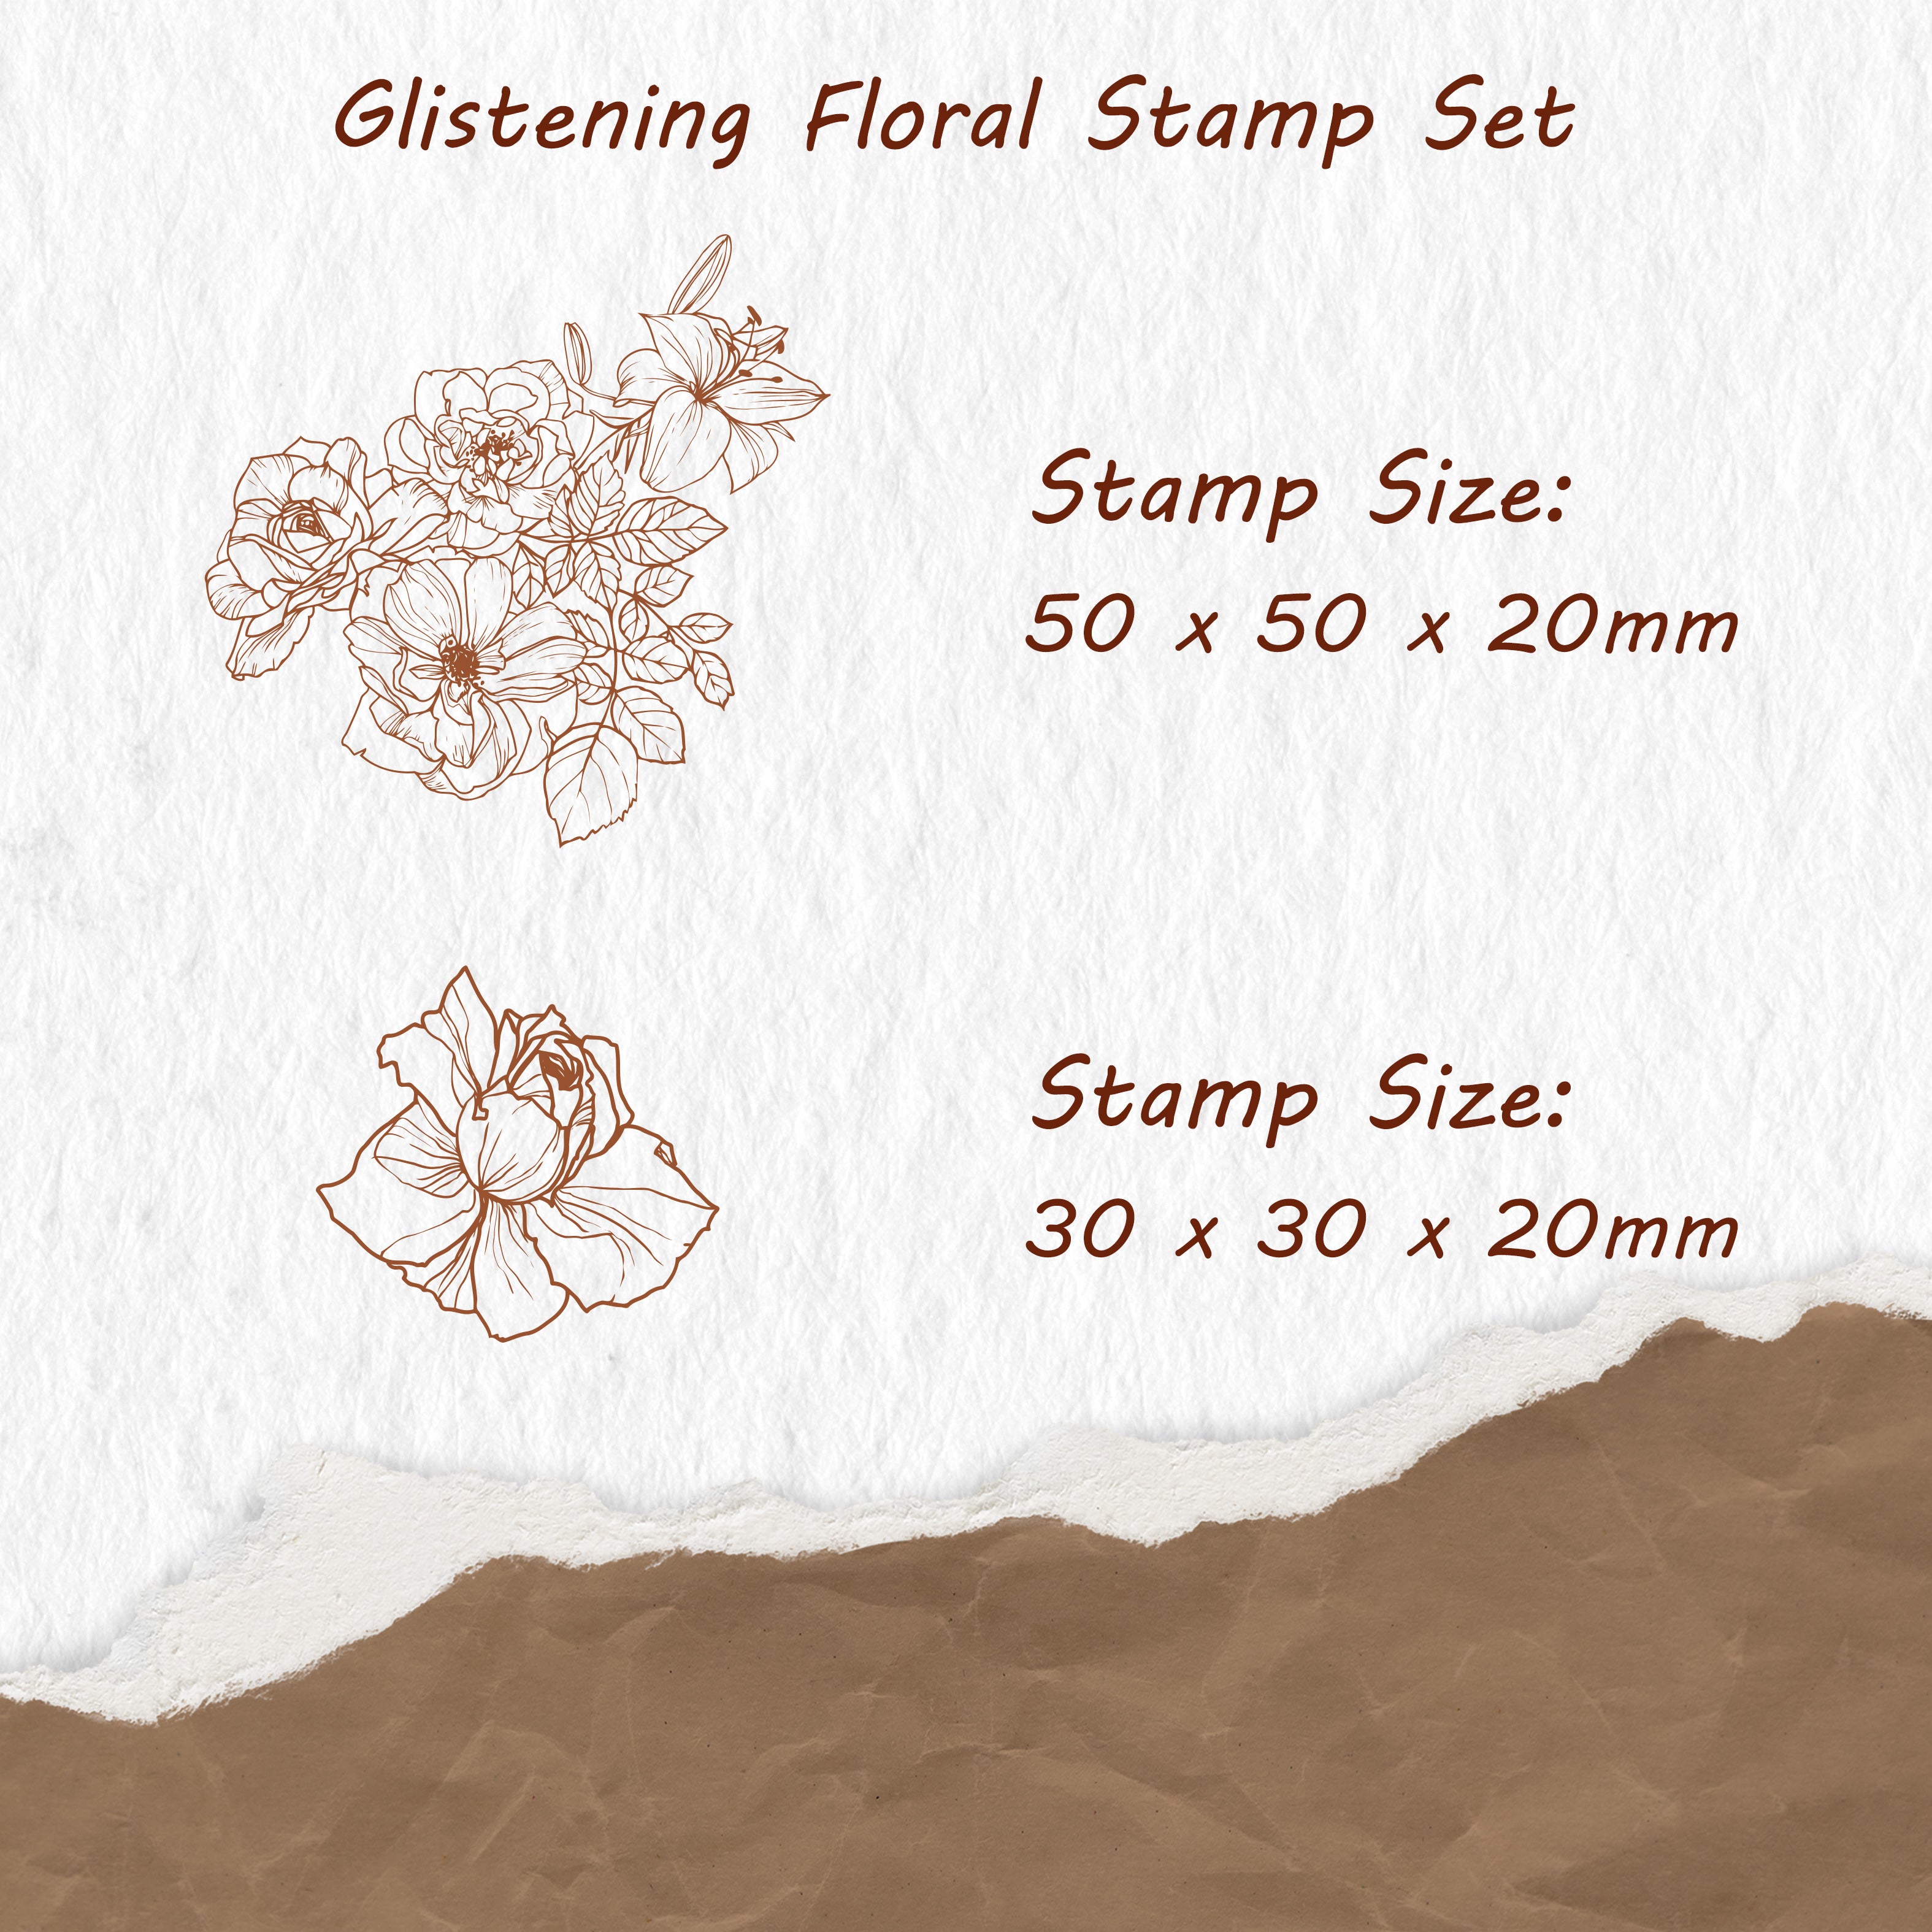 Glistening Floral Stamp Set | The Washi Tape Shop. Beautiful Washi and Decorative Tape For Bullet Journals, Gift Wrapping, Planner Decoration and DIY Projects